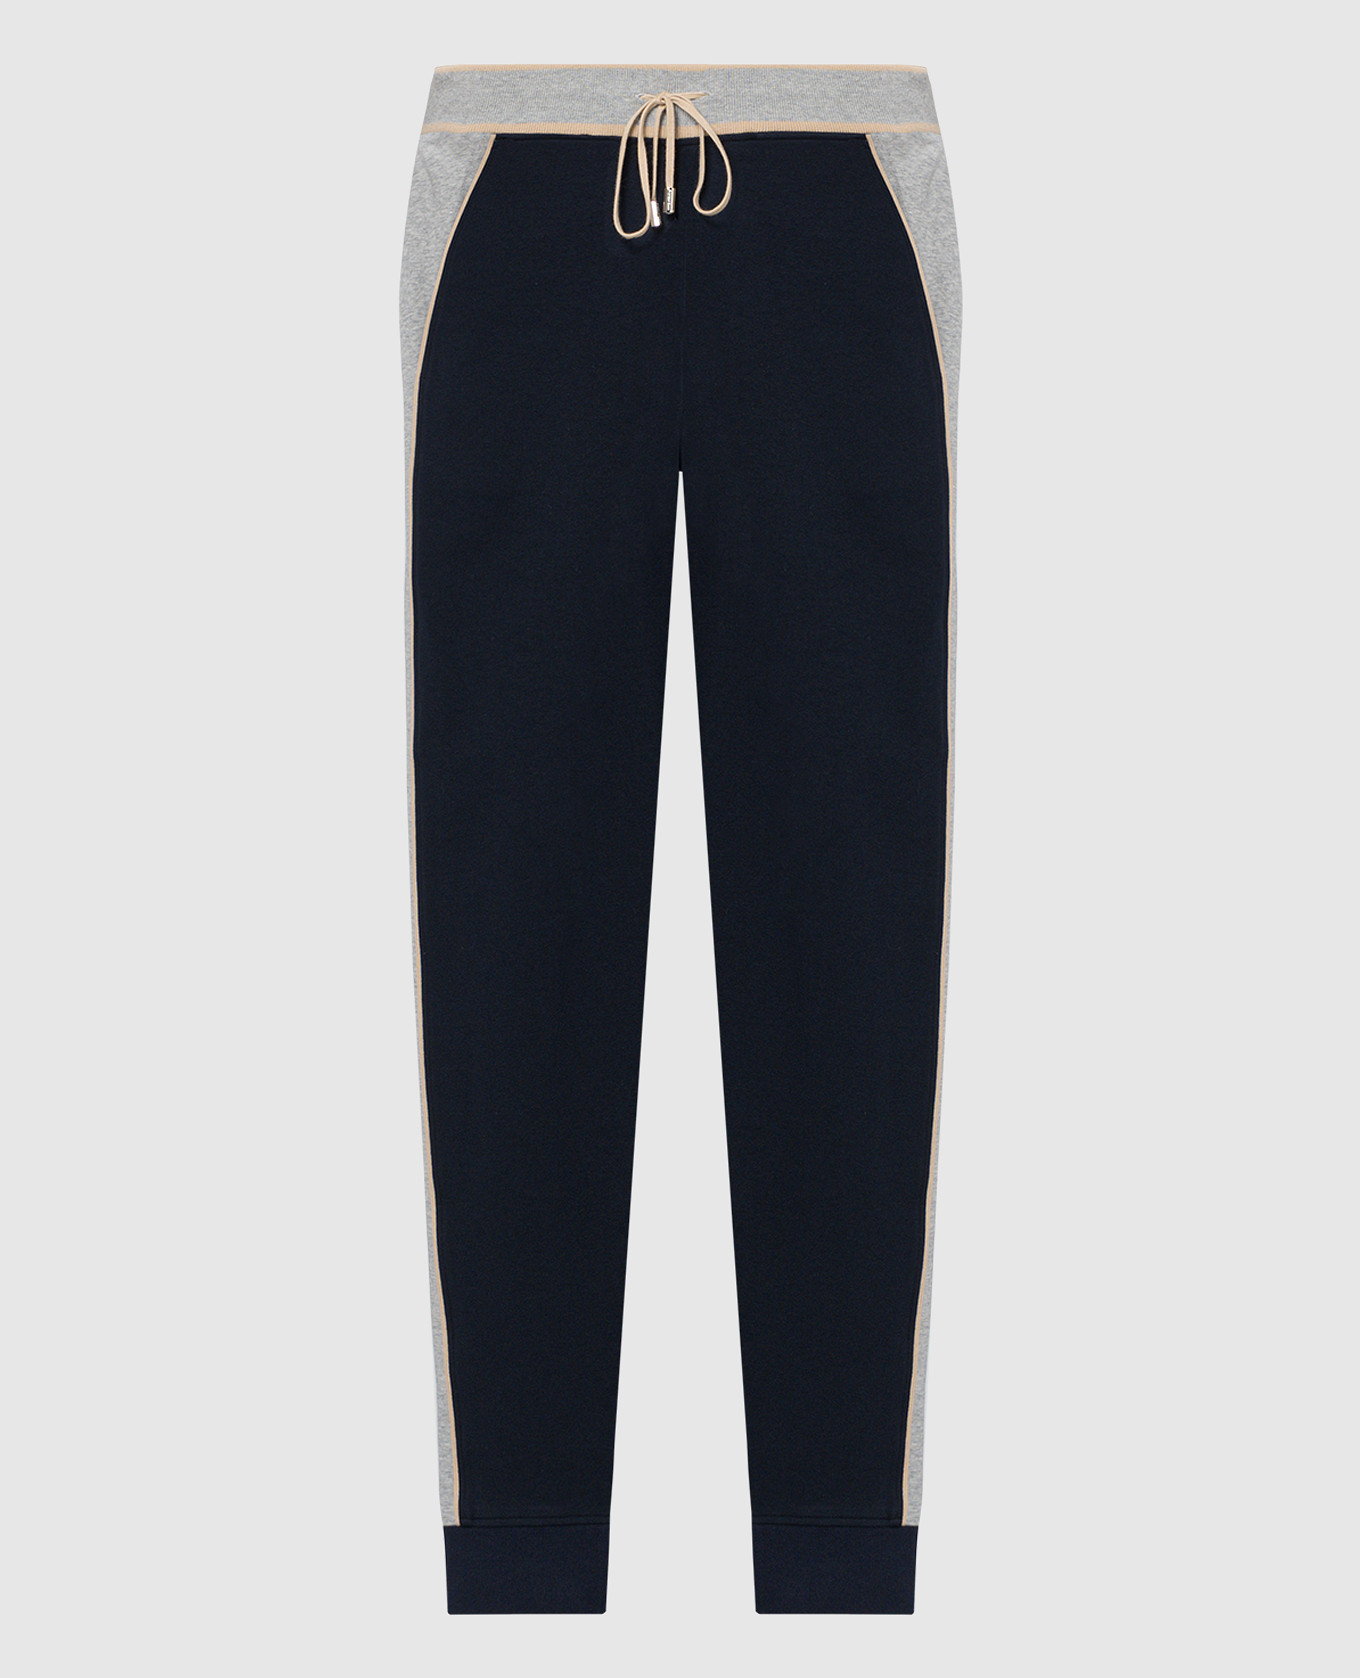 Blue joggers with monogram logo embroidery